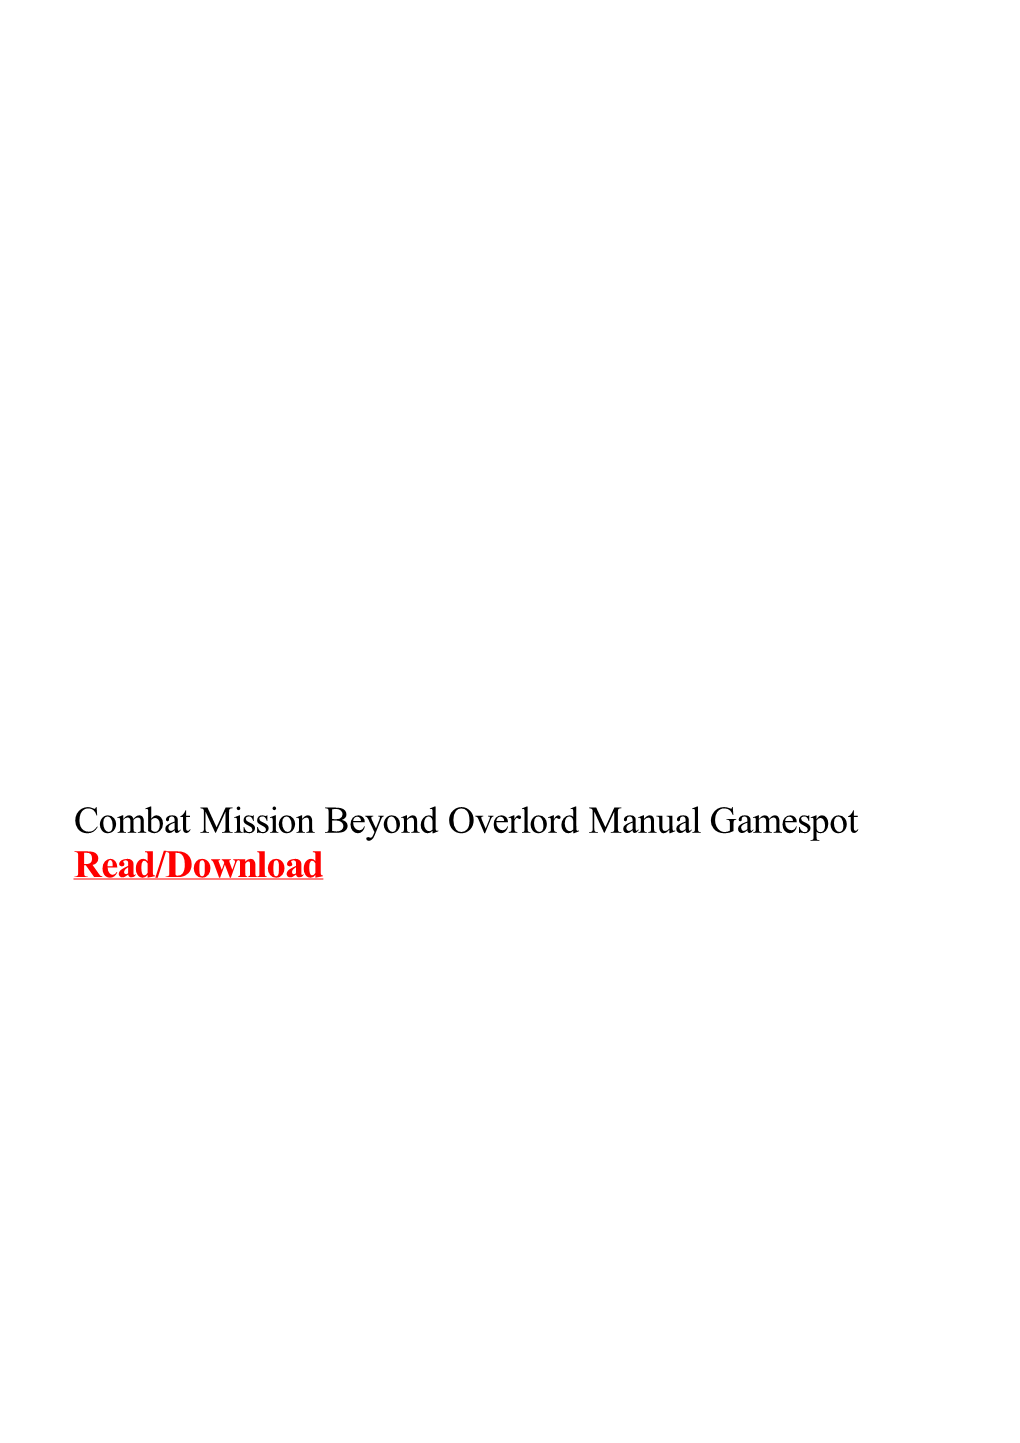 Combat Mission Beyond Overlord Manual Gamespot.Pdf